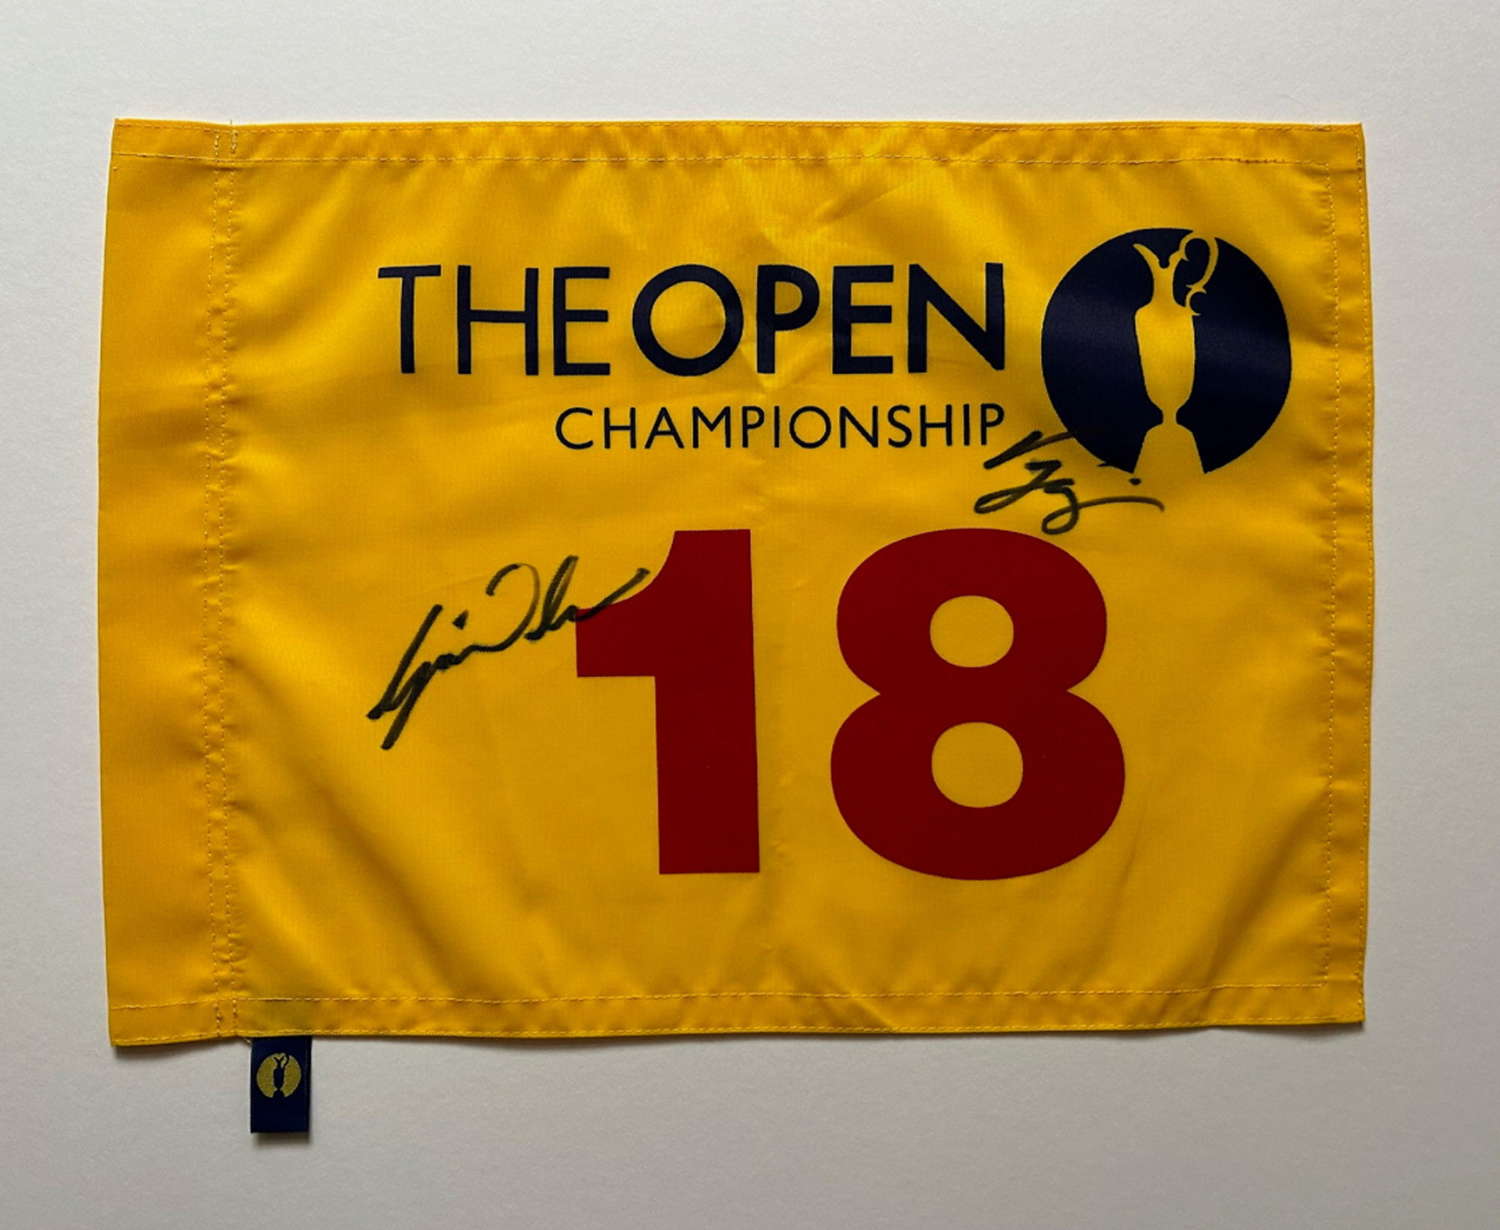 2006 Open Championship Pin Flag Signed by Tiger Woods and Vijay Singh